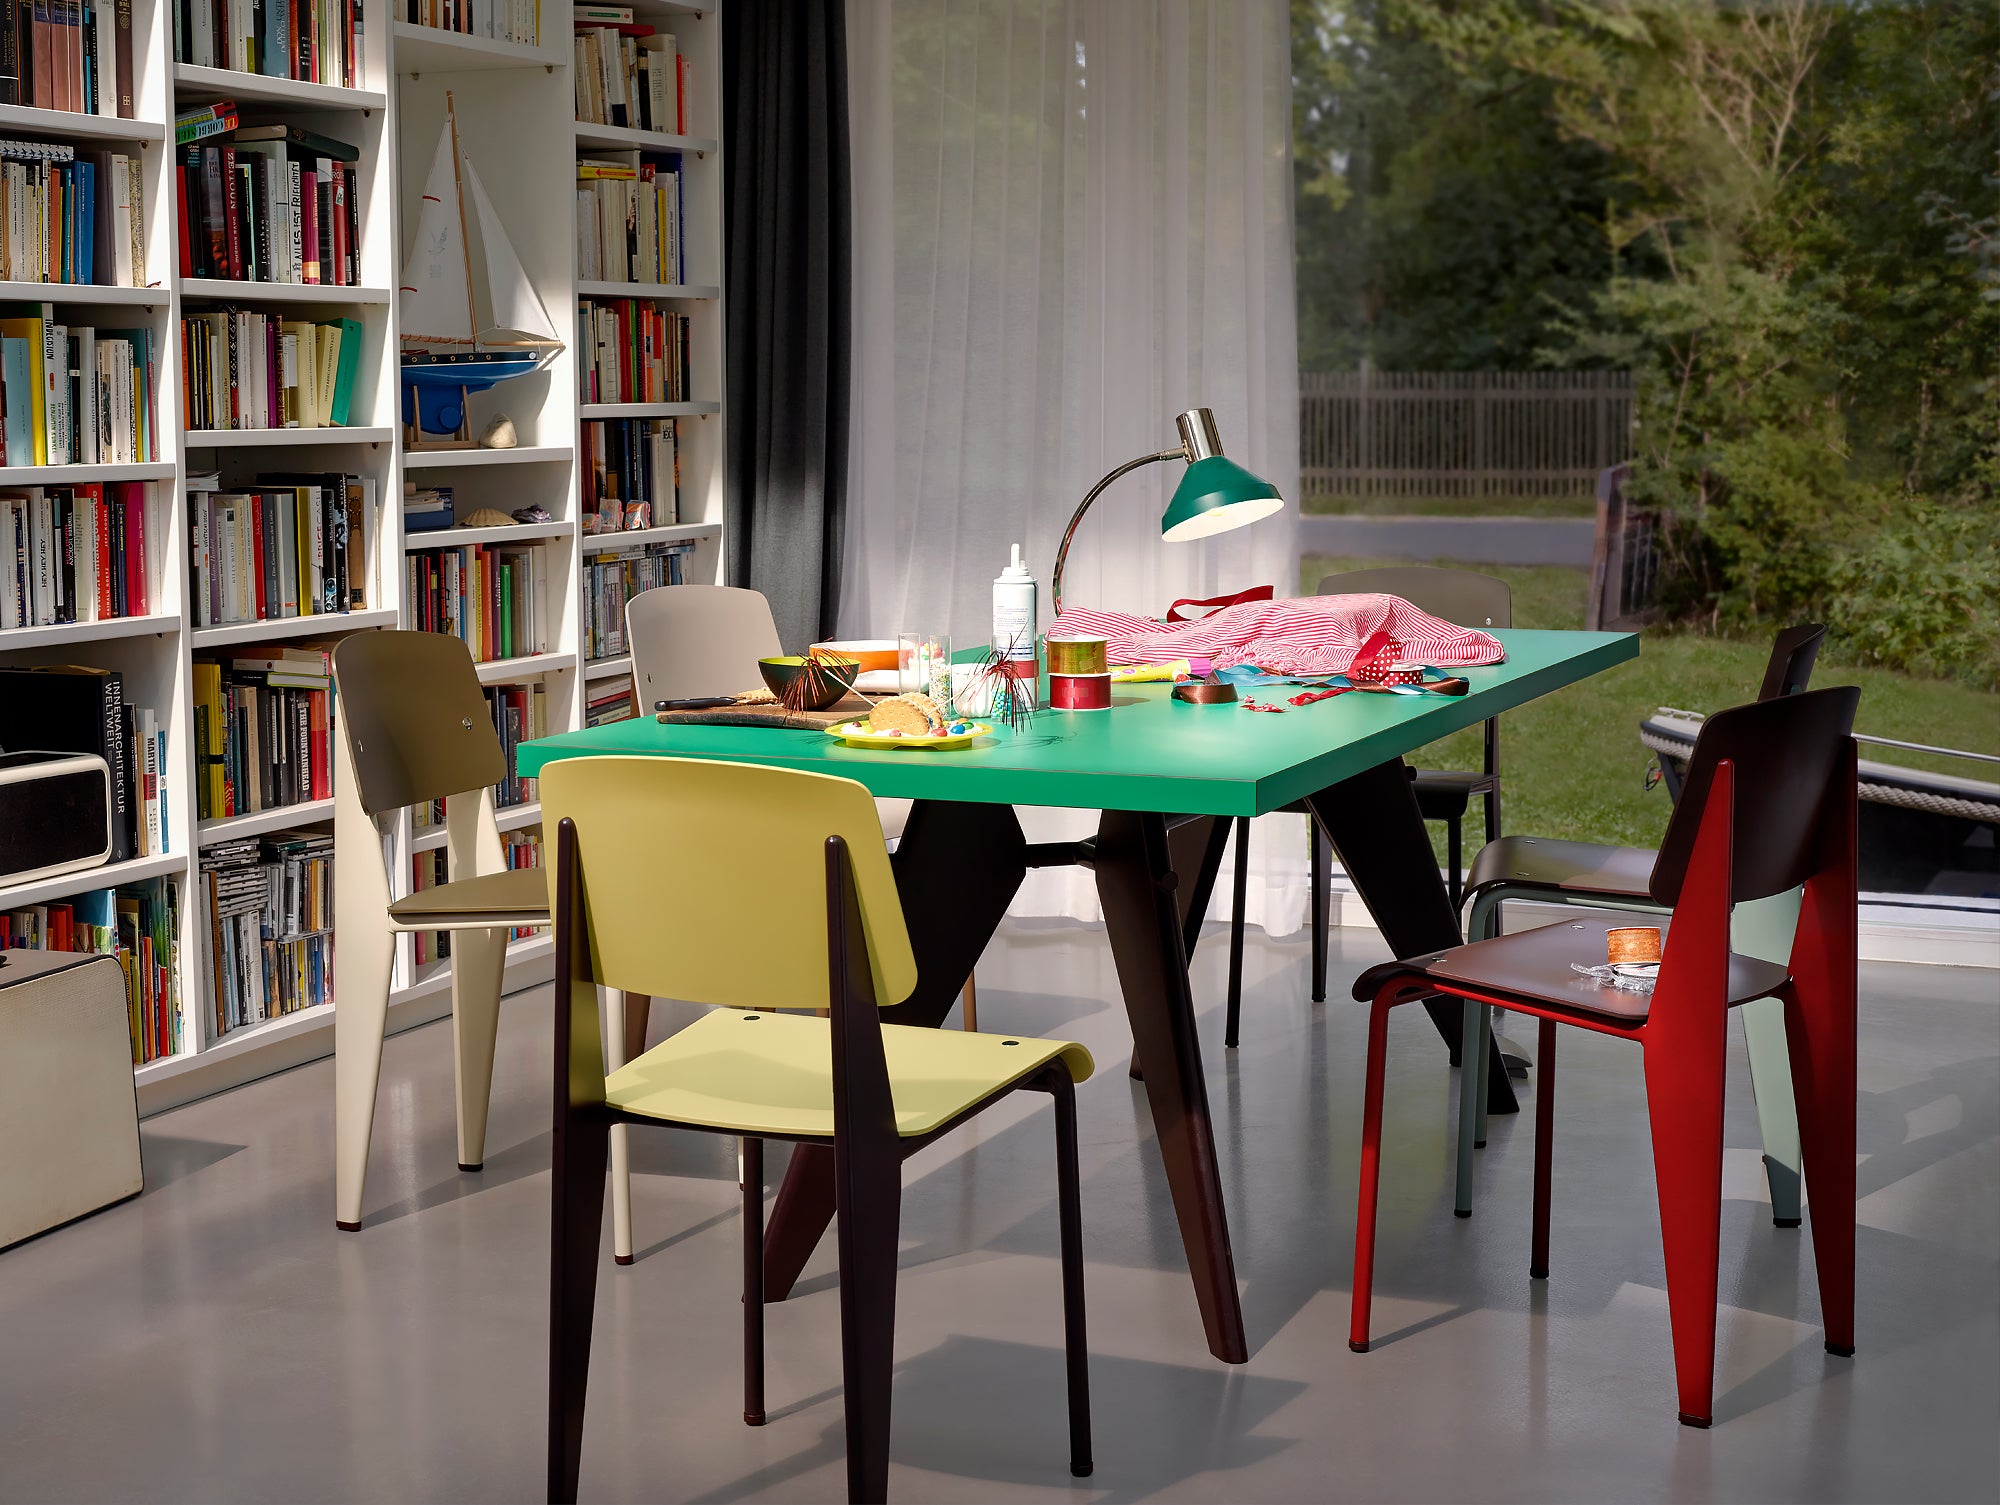 vitra.チェア　スタンダード SP（Jean Prouvé）①vitraスタンダードSP